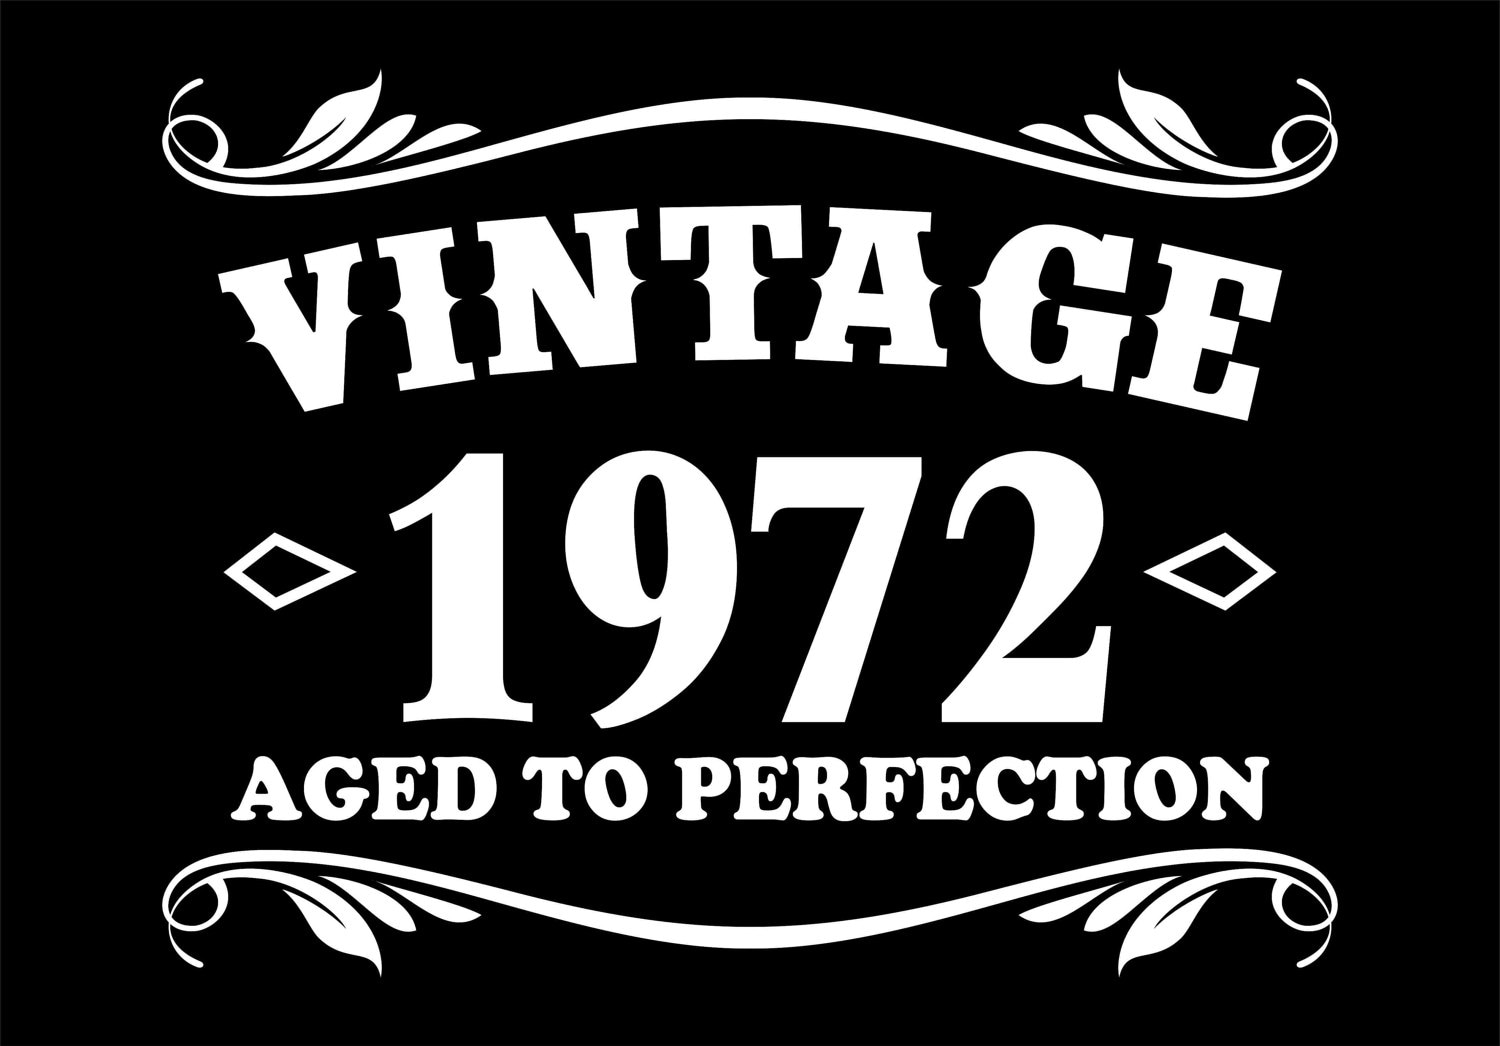 45th Birthday Vintage 1972 Aged to Perfection T-Shirt birthday